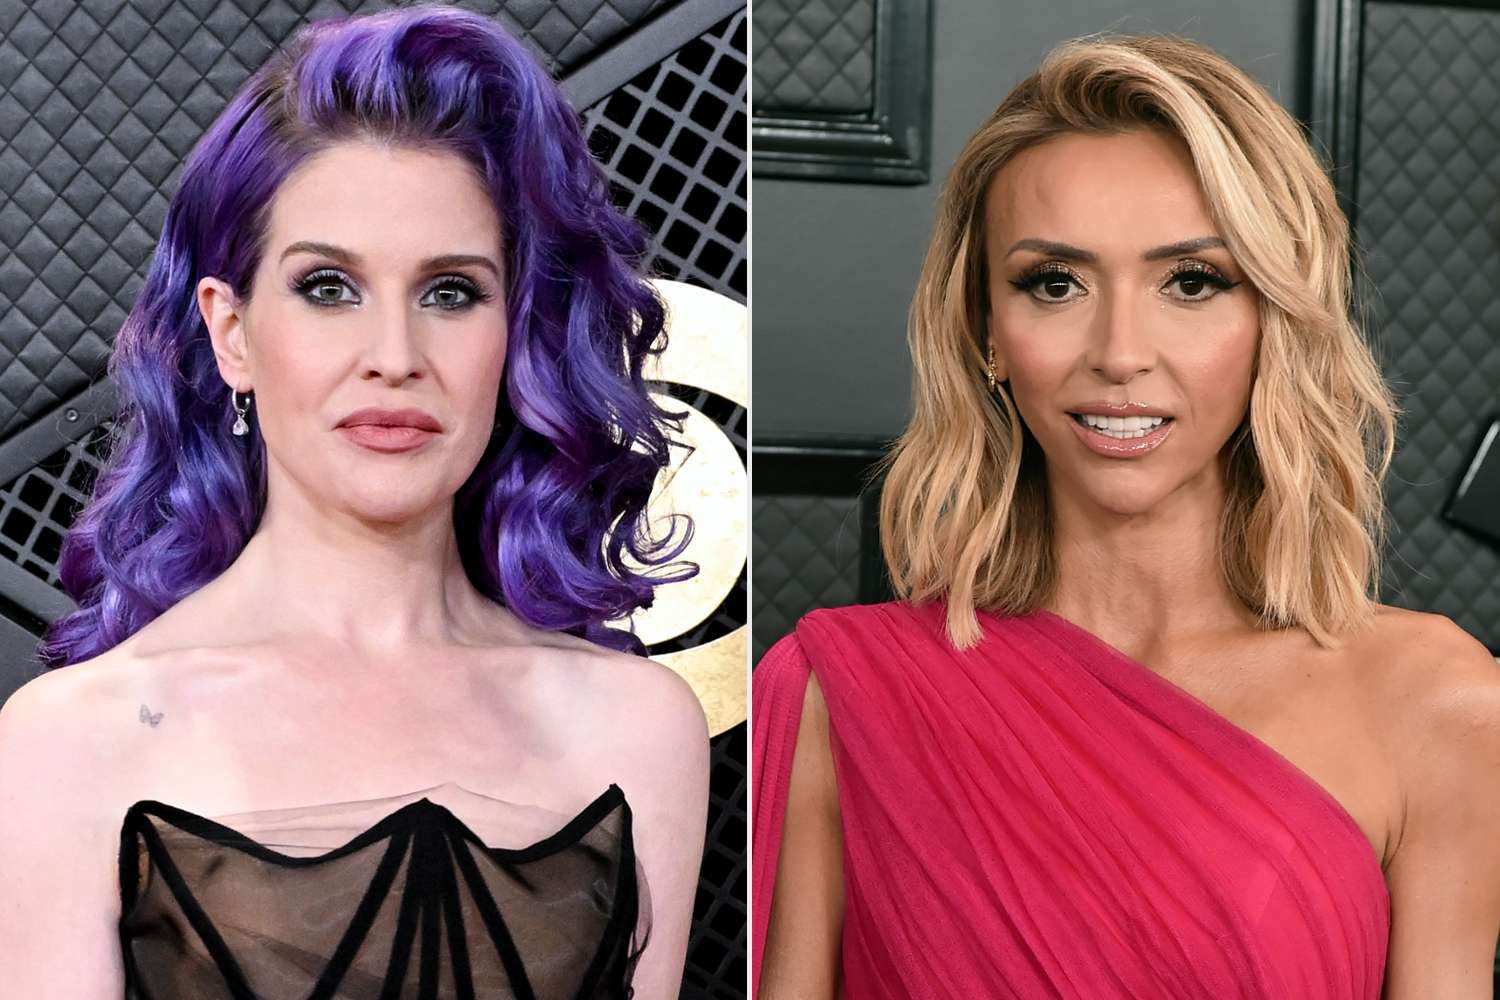 Kelly Osbourne Shares 'Biggest Regret' from “Fashion Police” Exit as She Slams Former Co-Host Giuliana Rancic